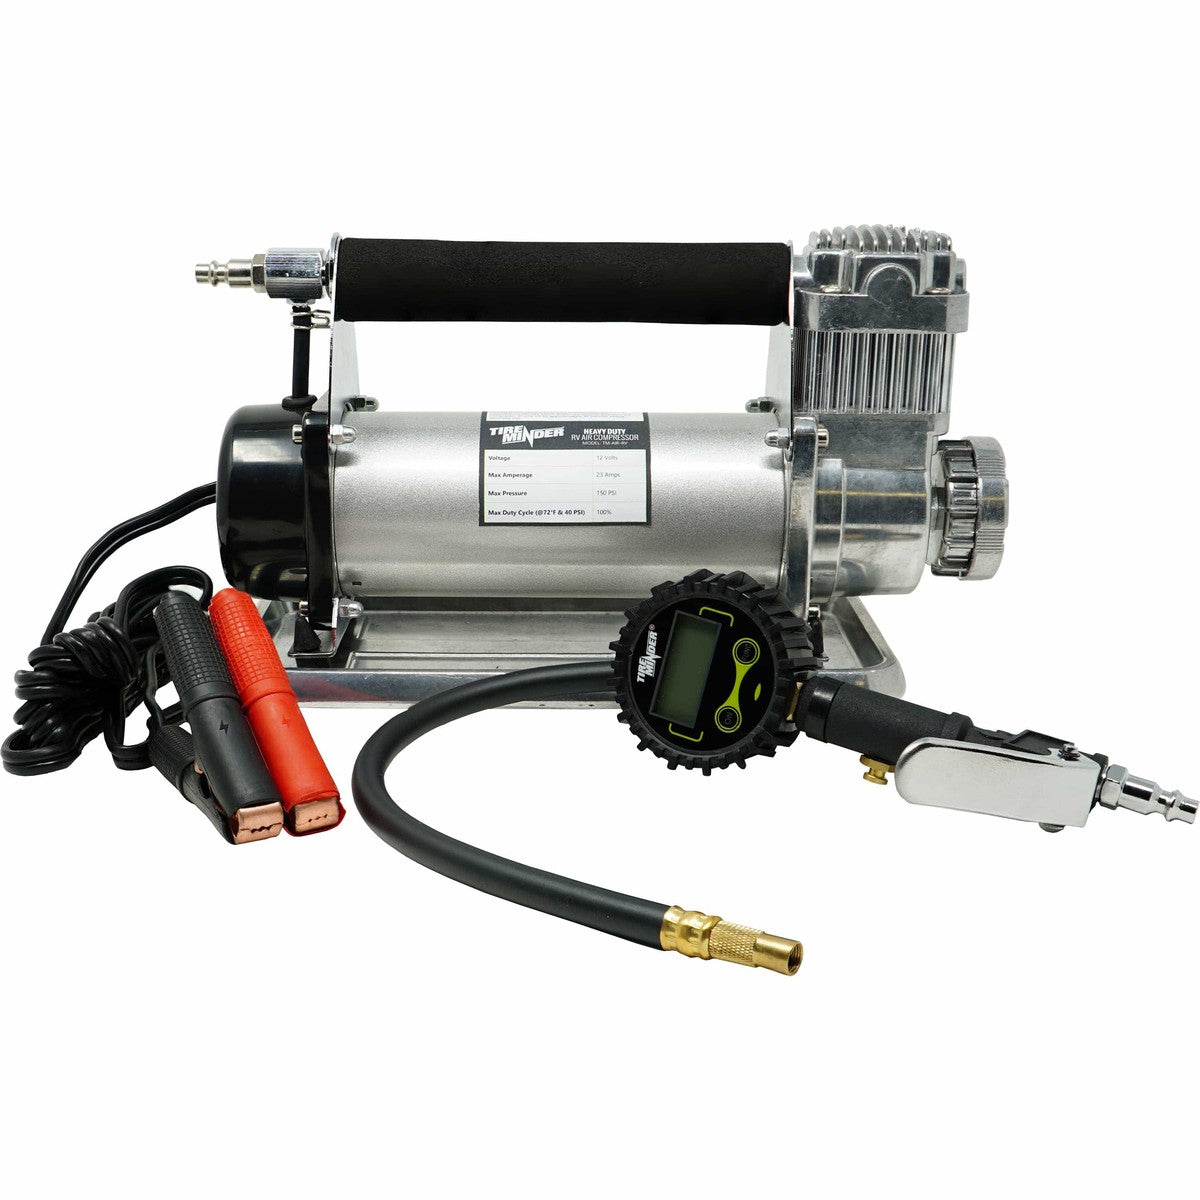 Minder Research Qualifies for Free Shipping Minder Research RV AIR Compressor #TM22192